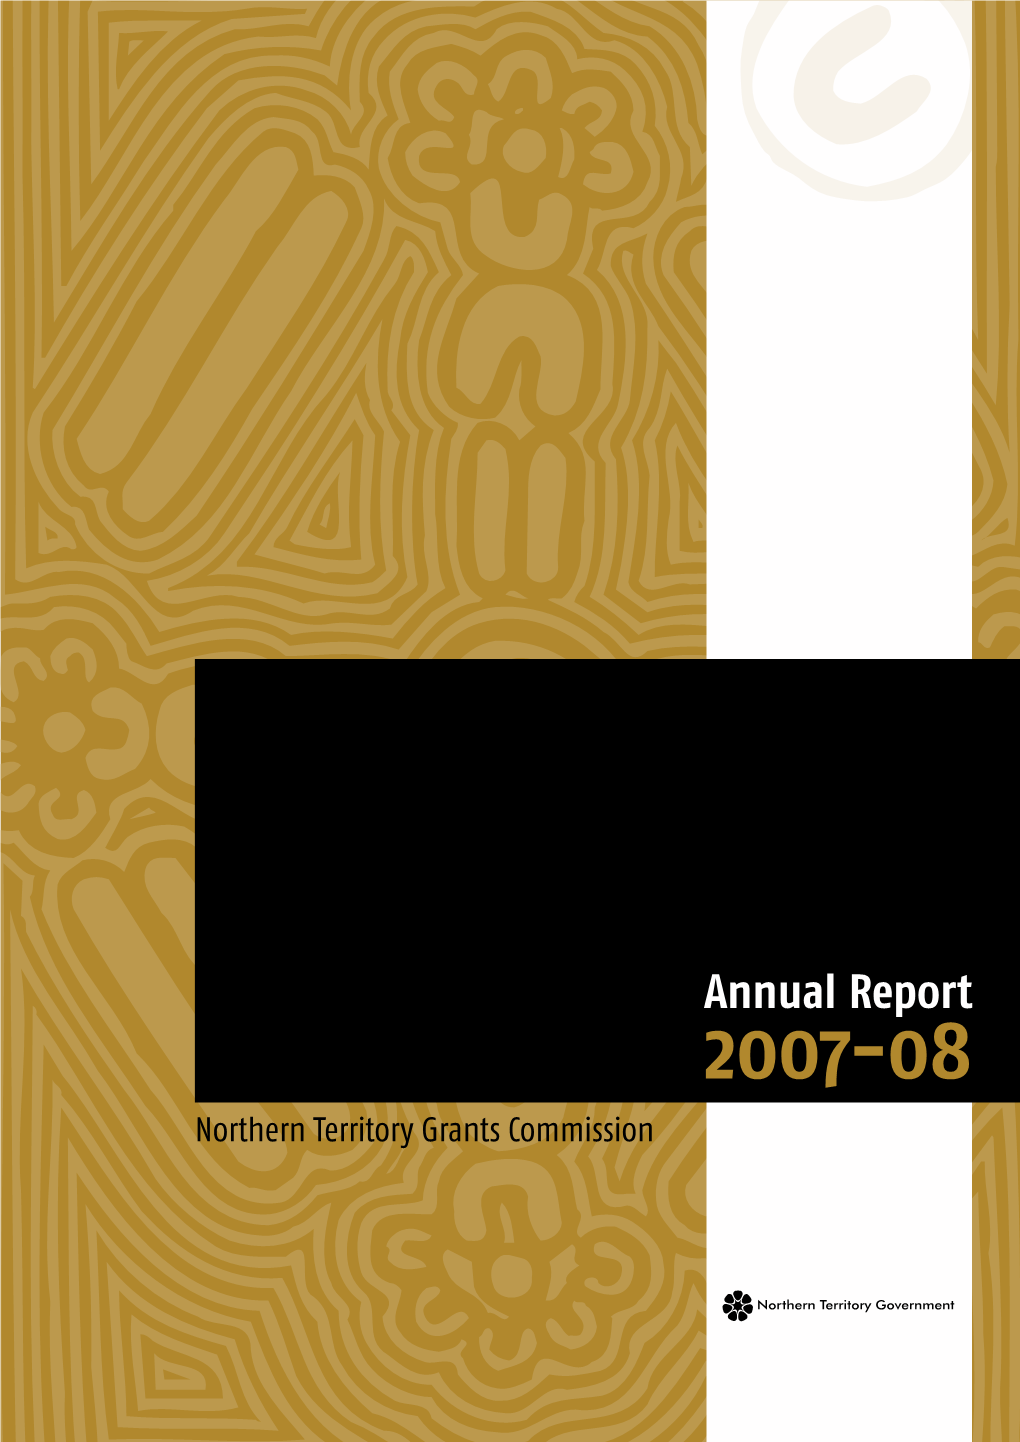 NT Grants Commission Annual Report 2007-08